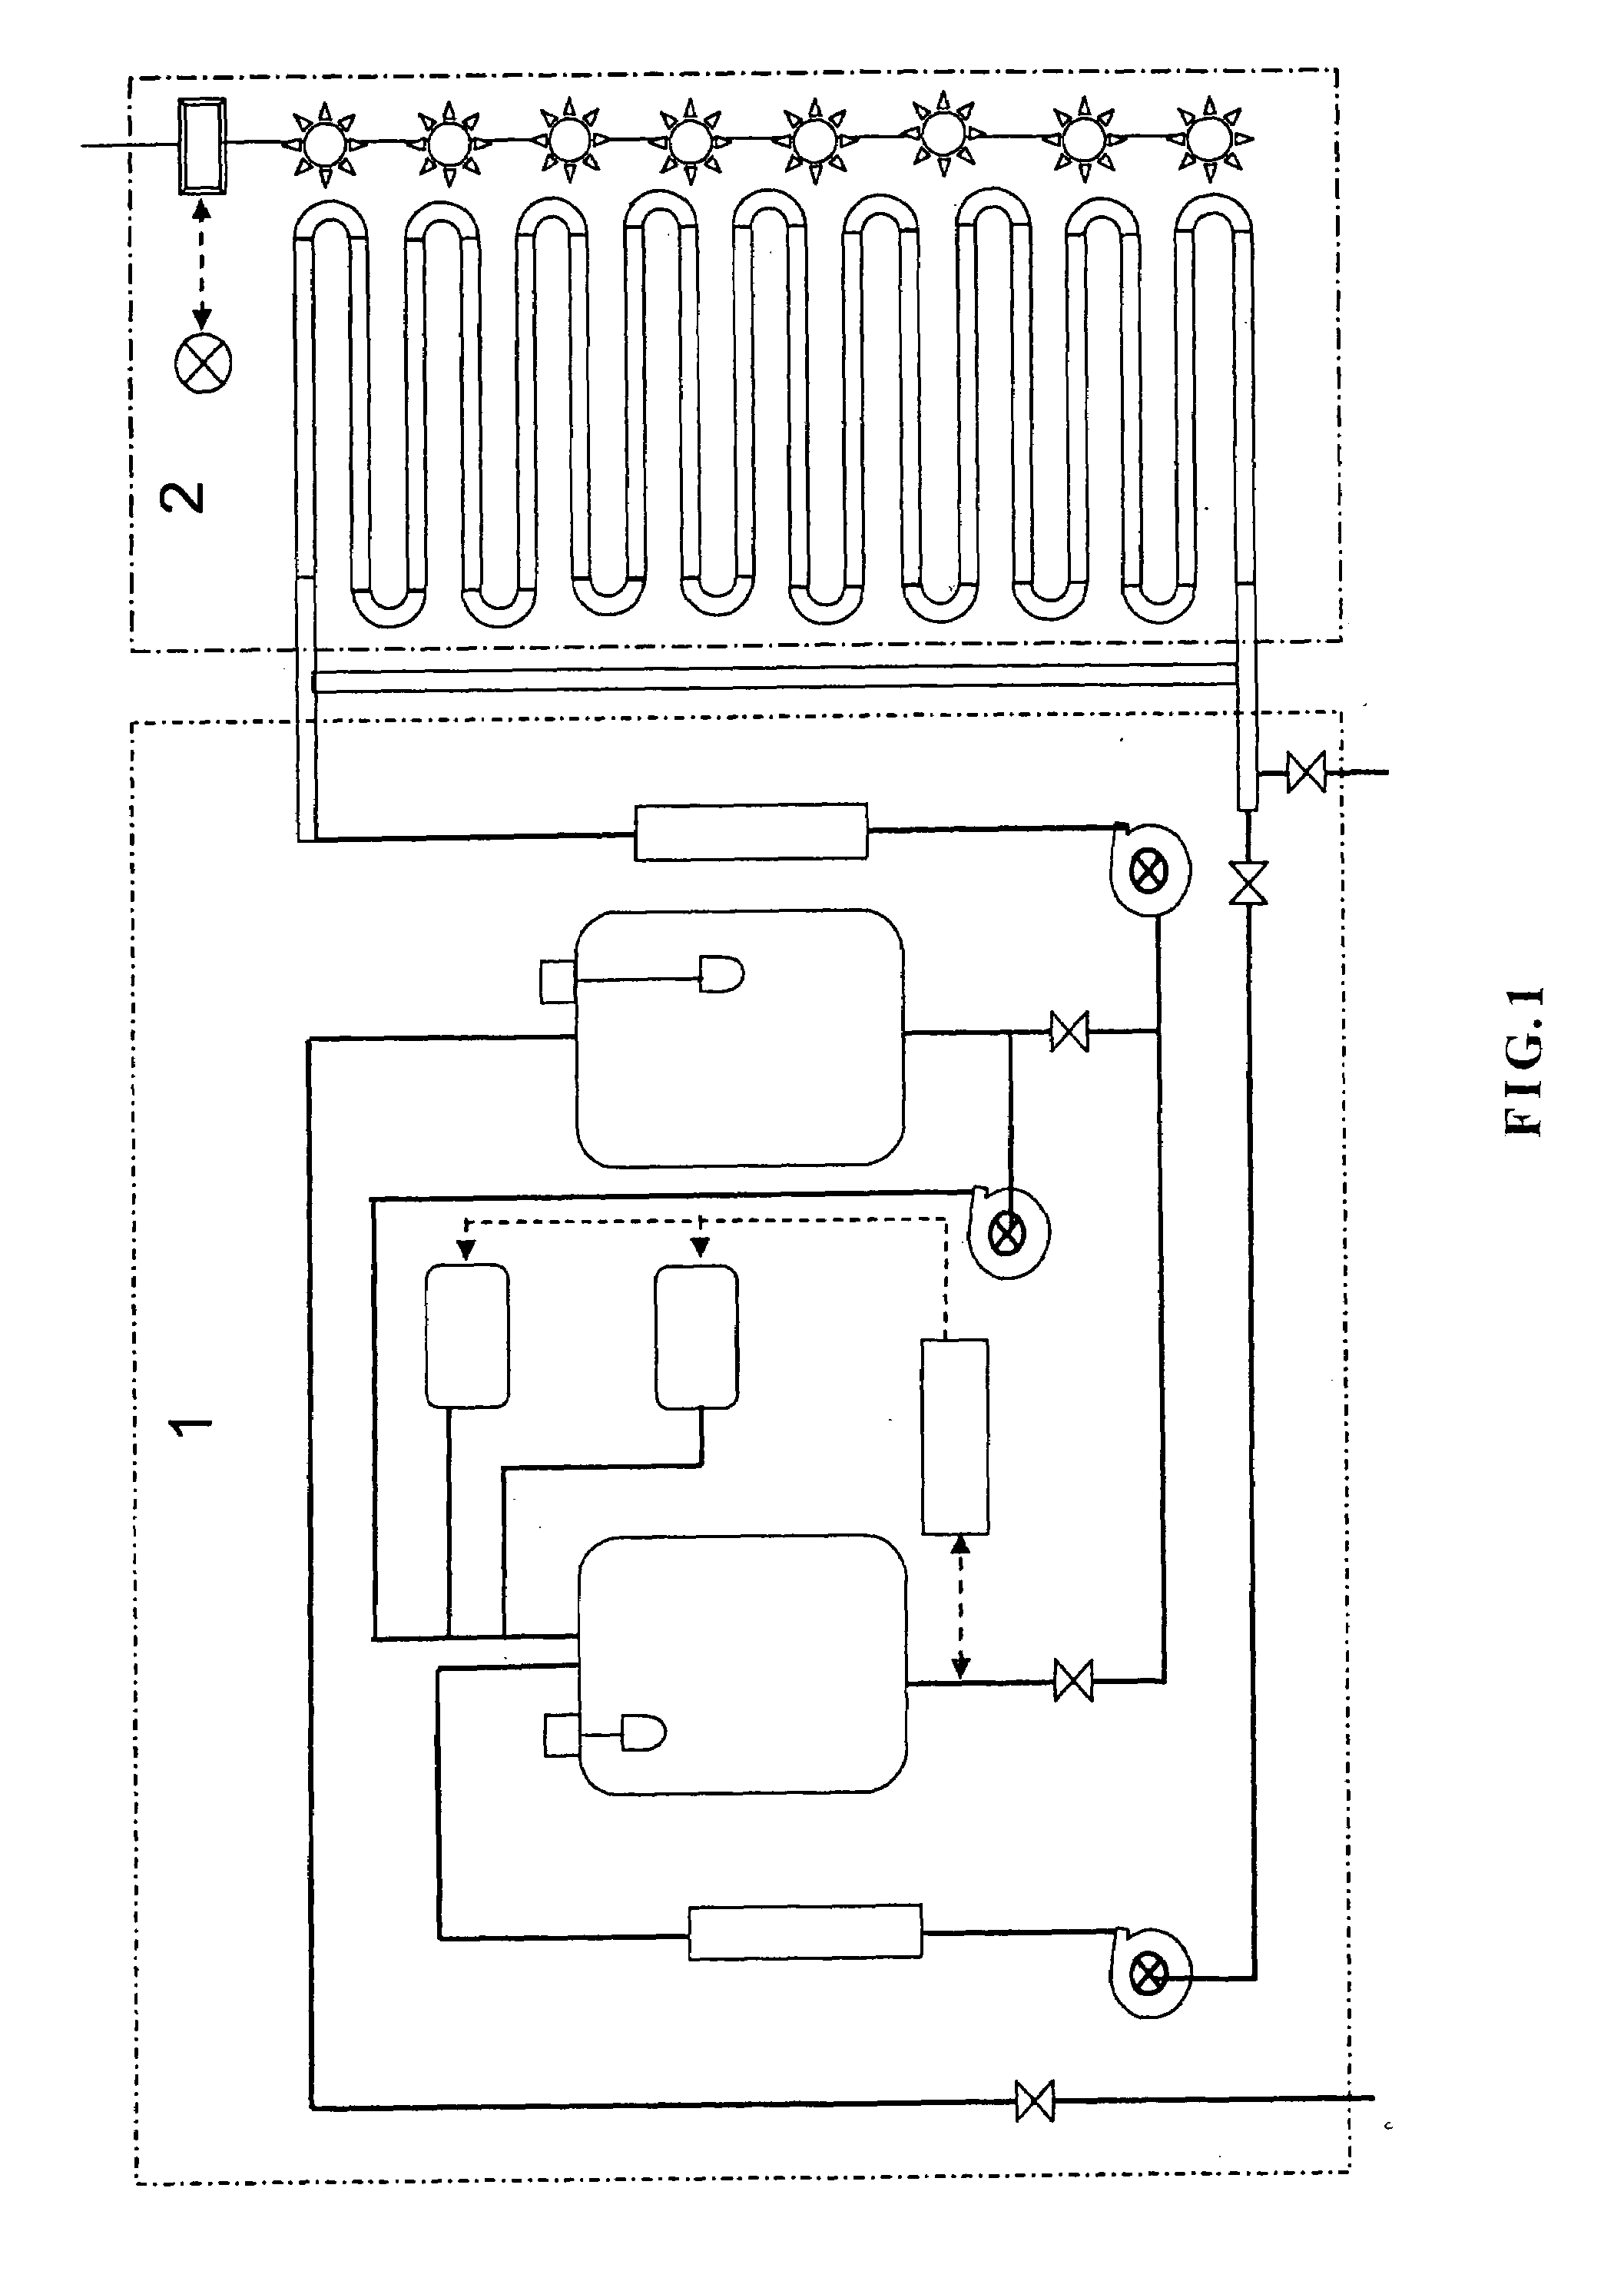 Low nitrate vegetable and its cultivation system and method